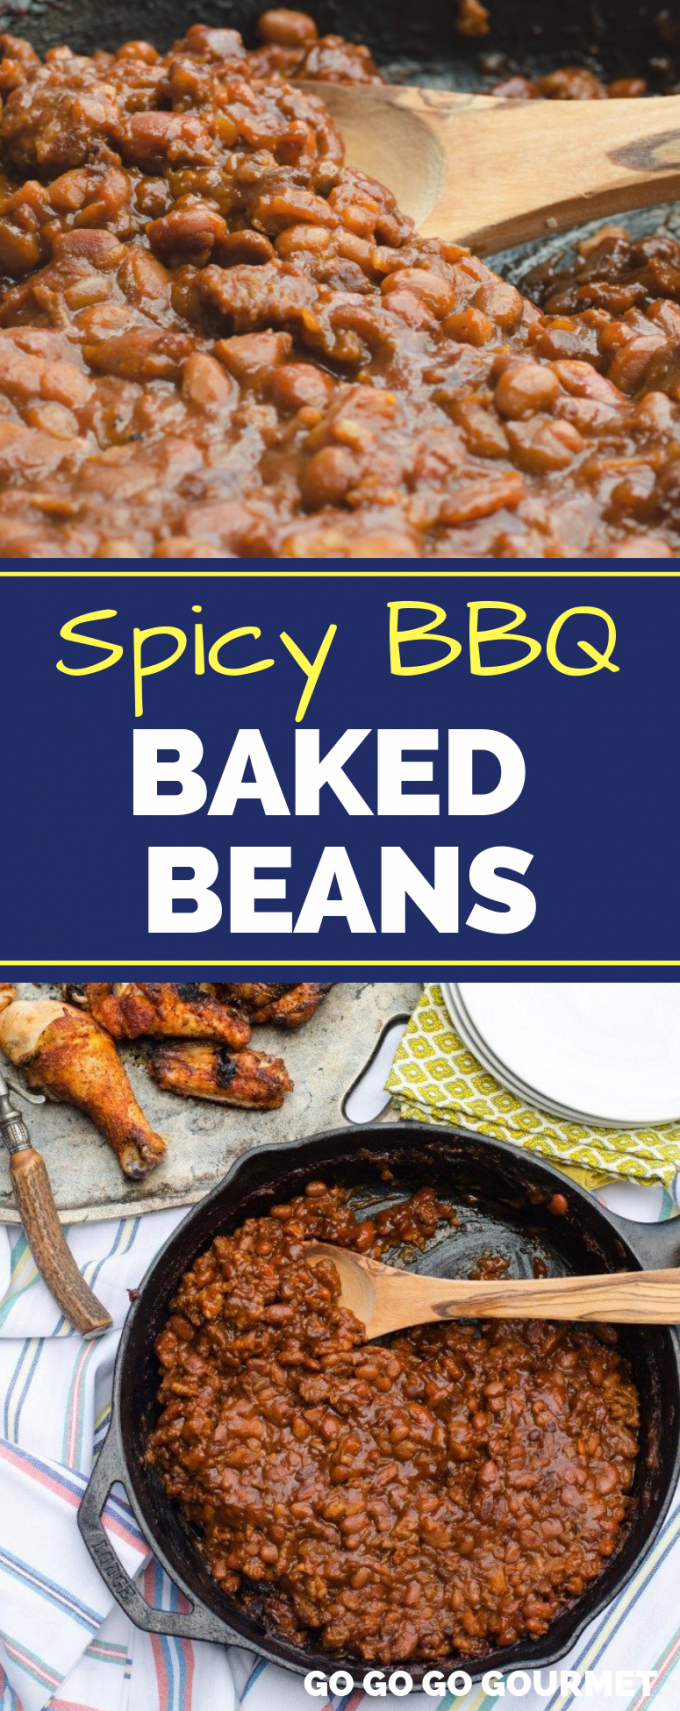 This Spicy BBQ Baked Beans recipe can be made with ground beef or Italian sausage! This easy "from scratch" recipe is even better than the Pioneer Woman version. Throw it in the crockpot for the perfect summer barbecue side dish! #gogogogourmet #spicybbqbakedbeans #bakedbeansrecipe #bakedbeansfromscratch via @gogogogourmet